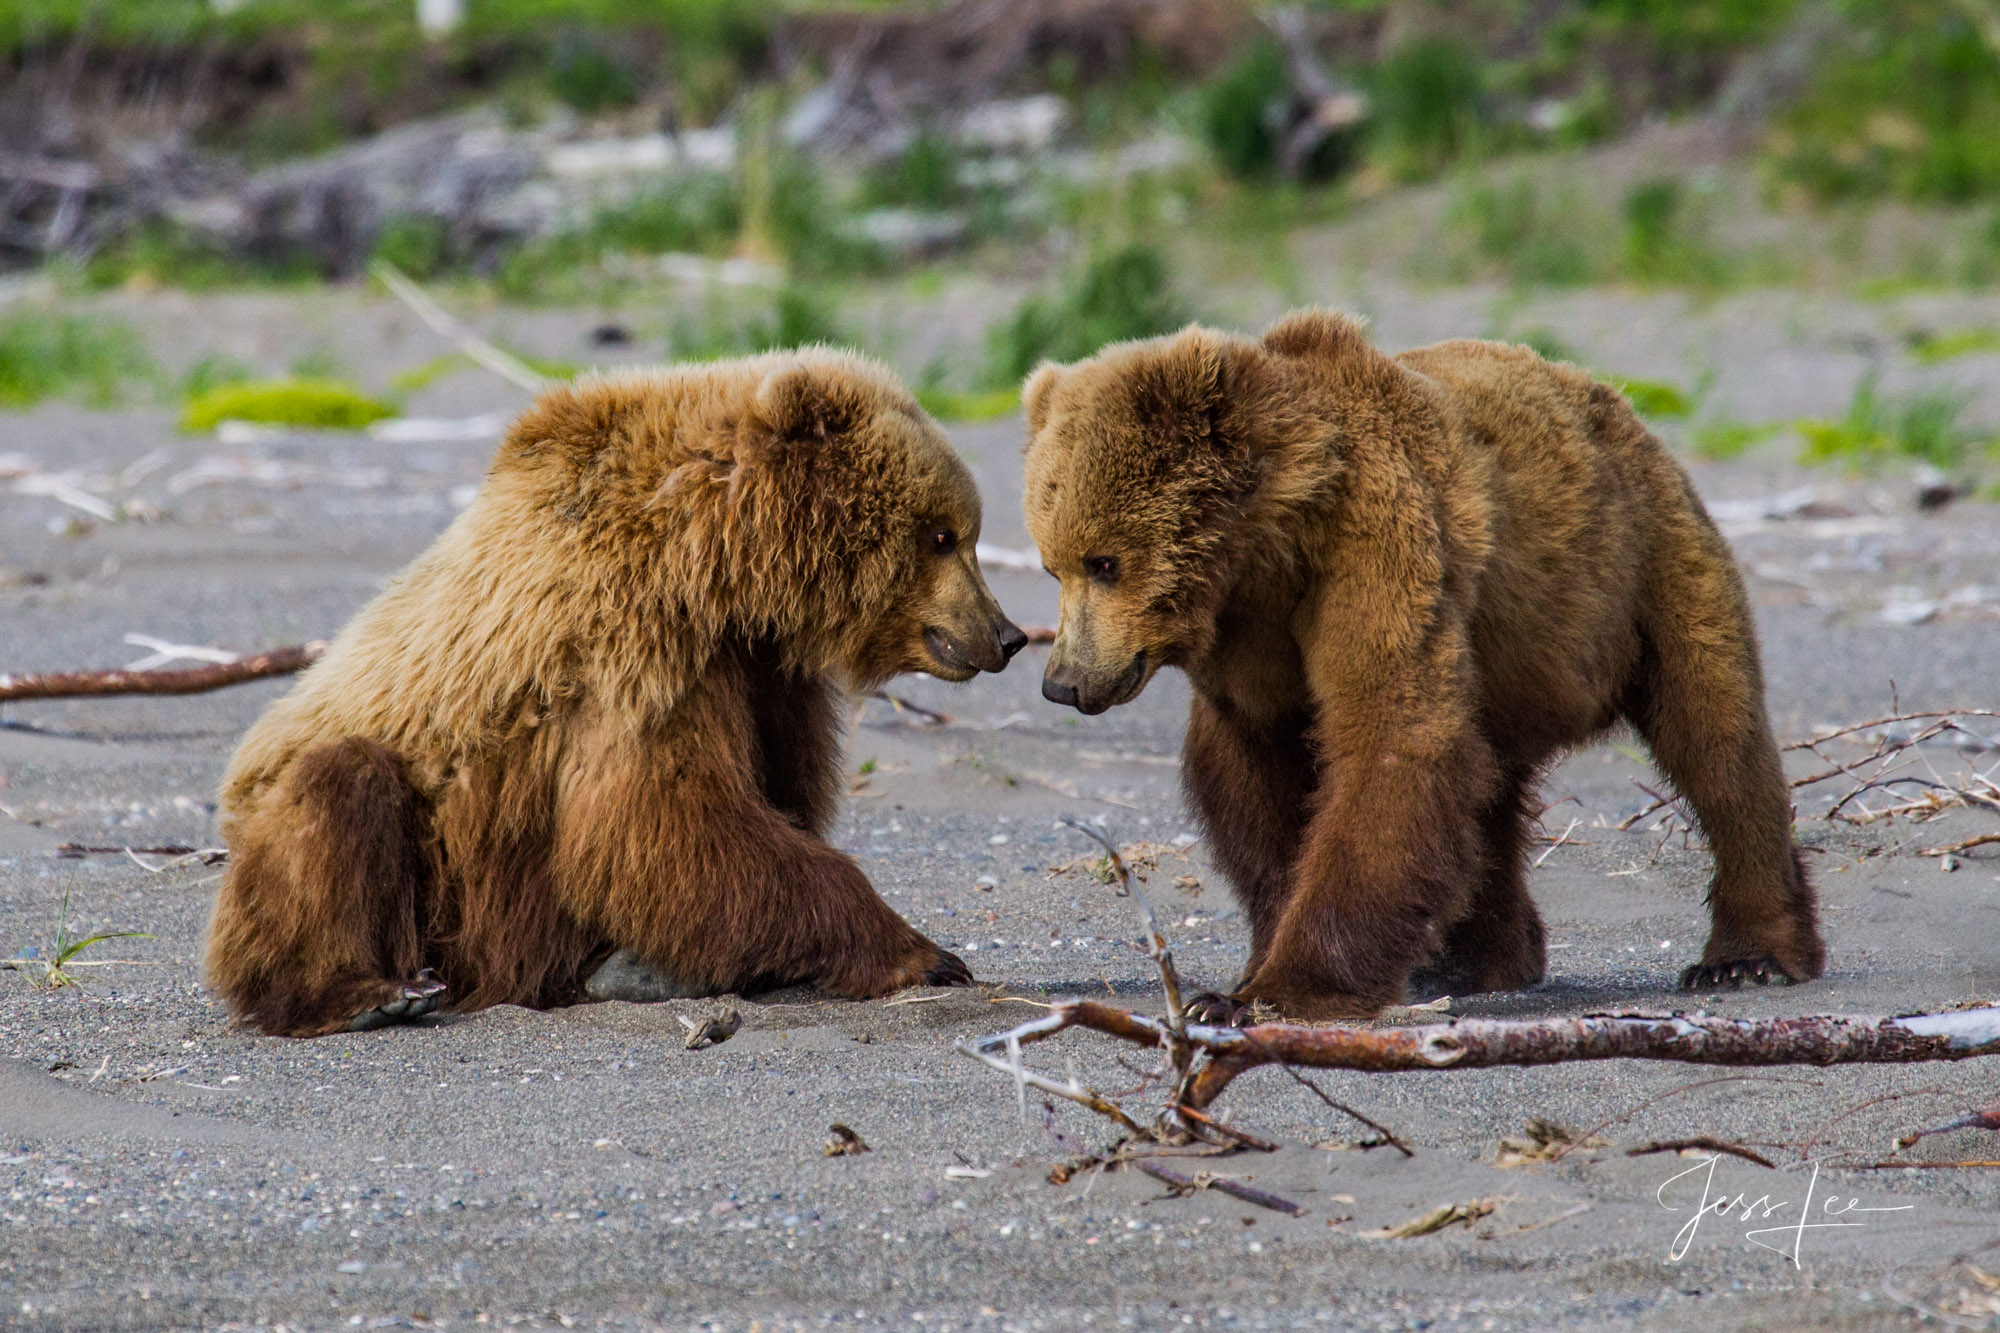 Alaska Grizzlys, Cubs, Moms, Bores, Limited edition of 800 prints. These Grizzly bear fine art wildlife photographs are offered...